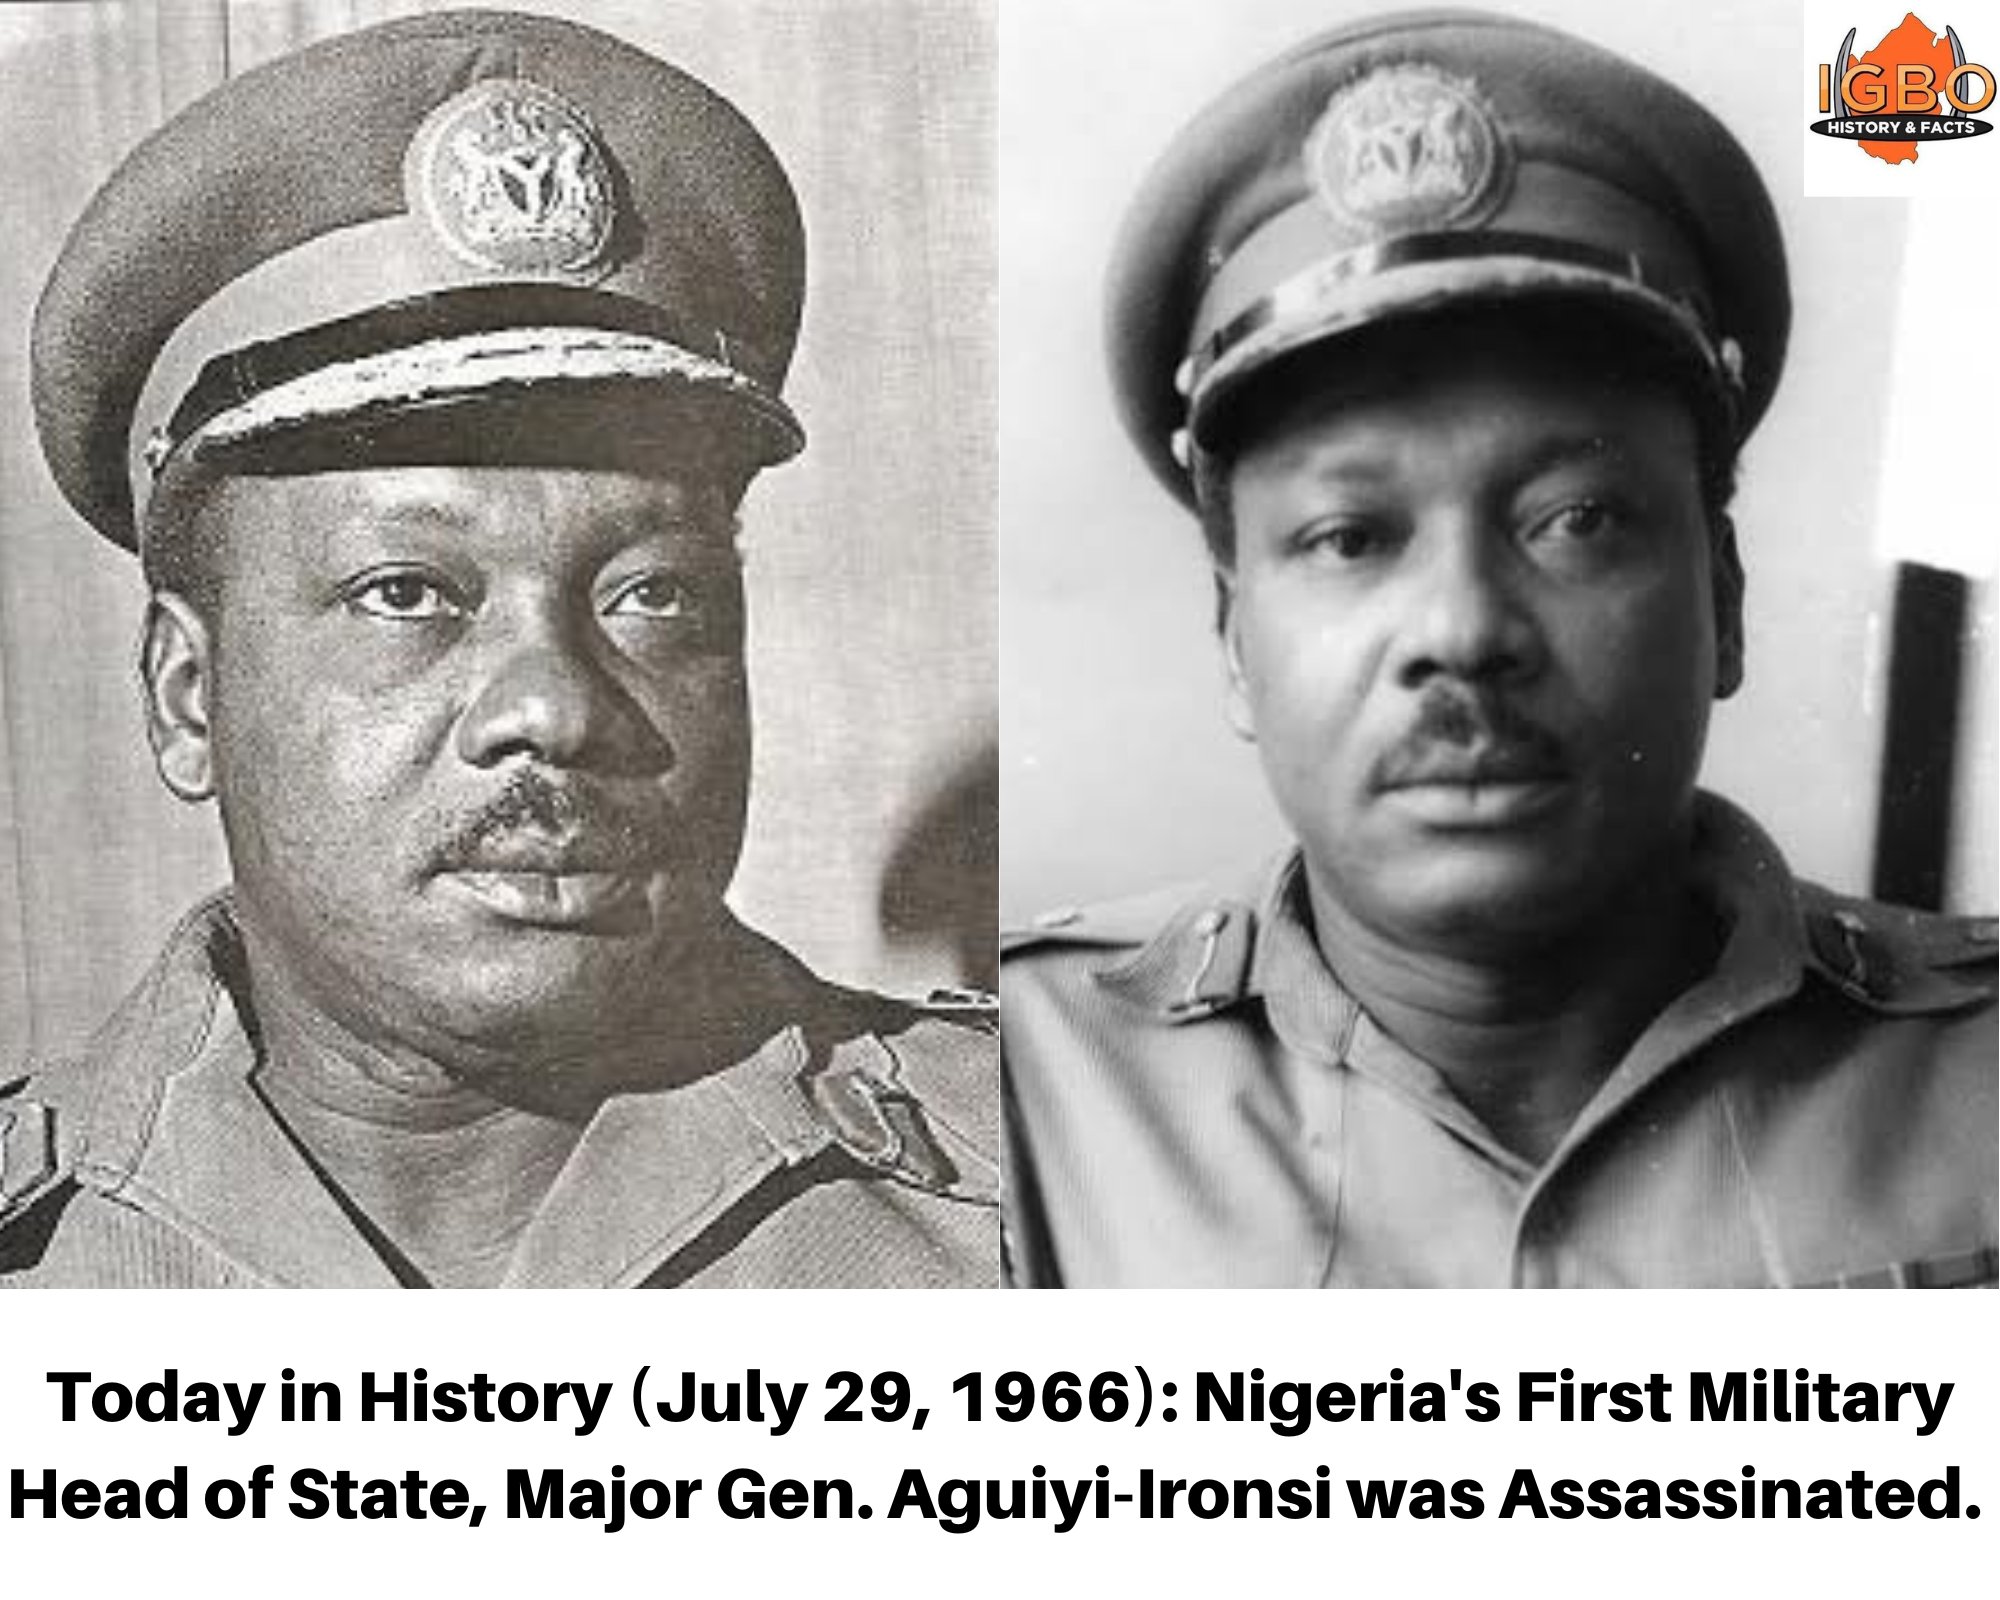 History today: Nigeria’s first military head of state, Aguiyi-Ironsi was assassinated